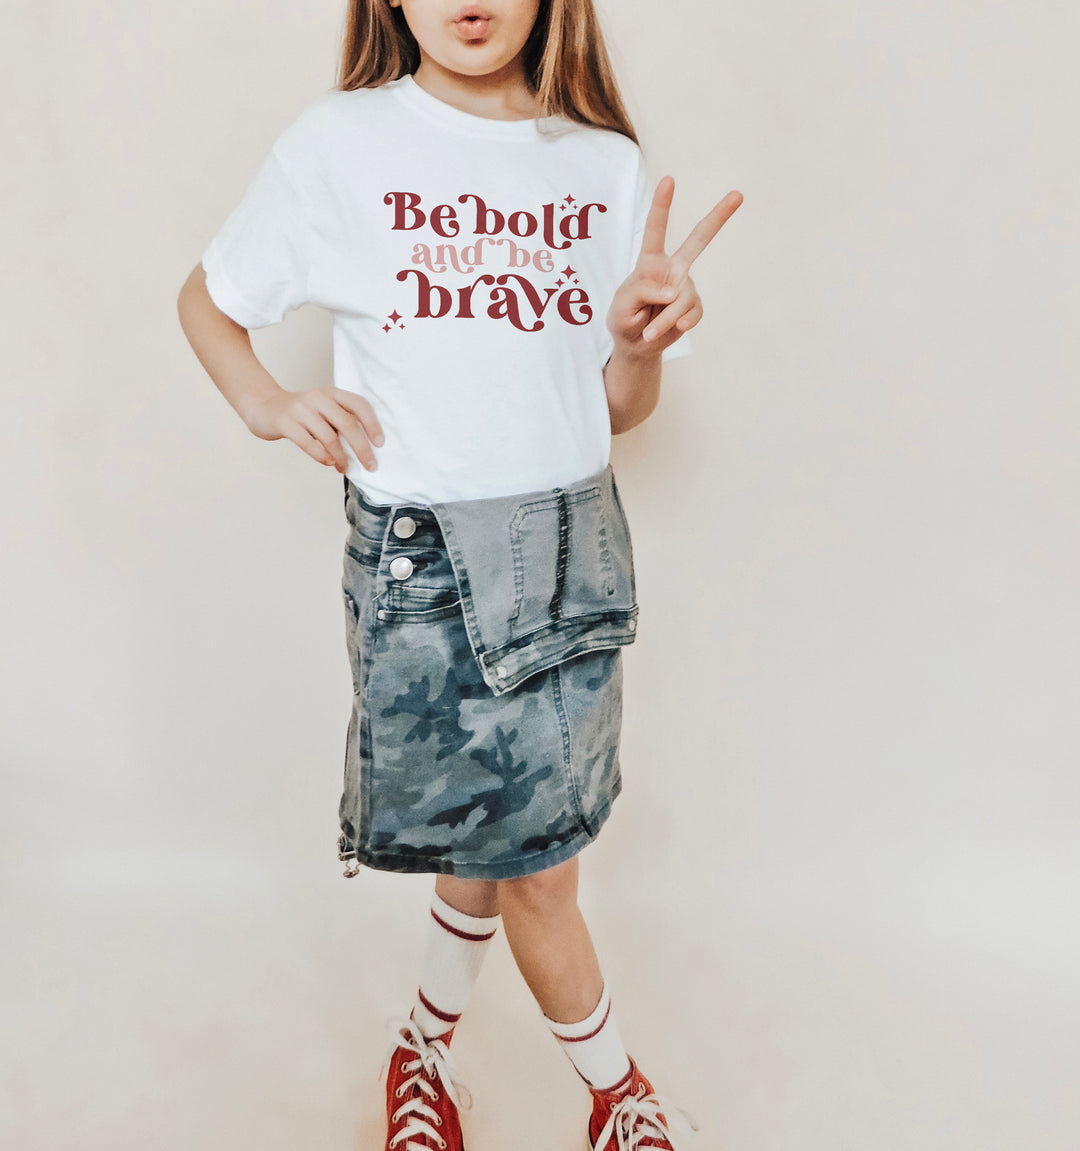 Be Bold And Be Brave. Short Sleeve T Shirt For Toddler And Kids. - TeesForToddlersandKids -  t-shirt - positive - be-bold-and-be-brave-short-sleeve-t-shirt-for-toddler-and-kids